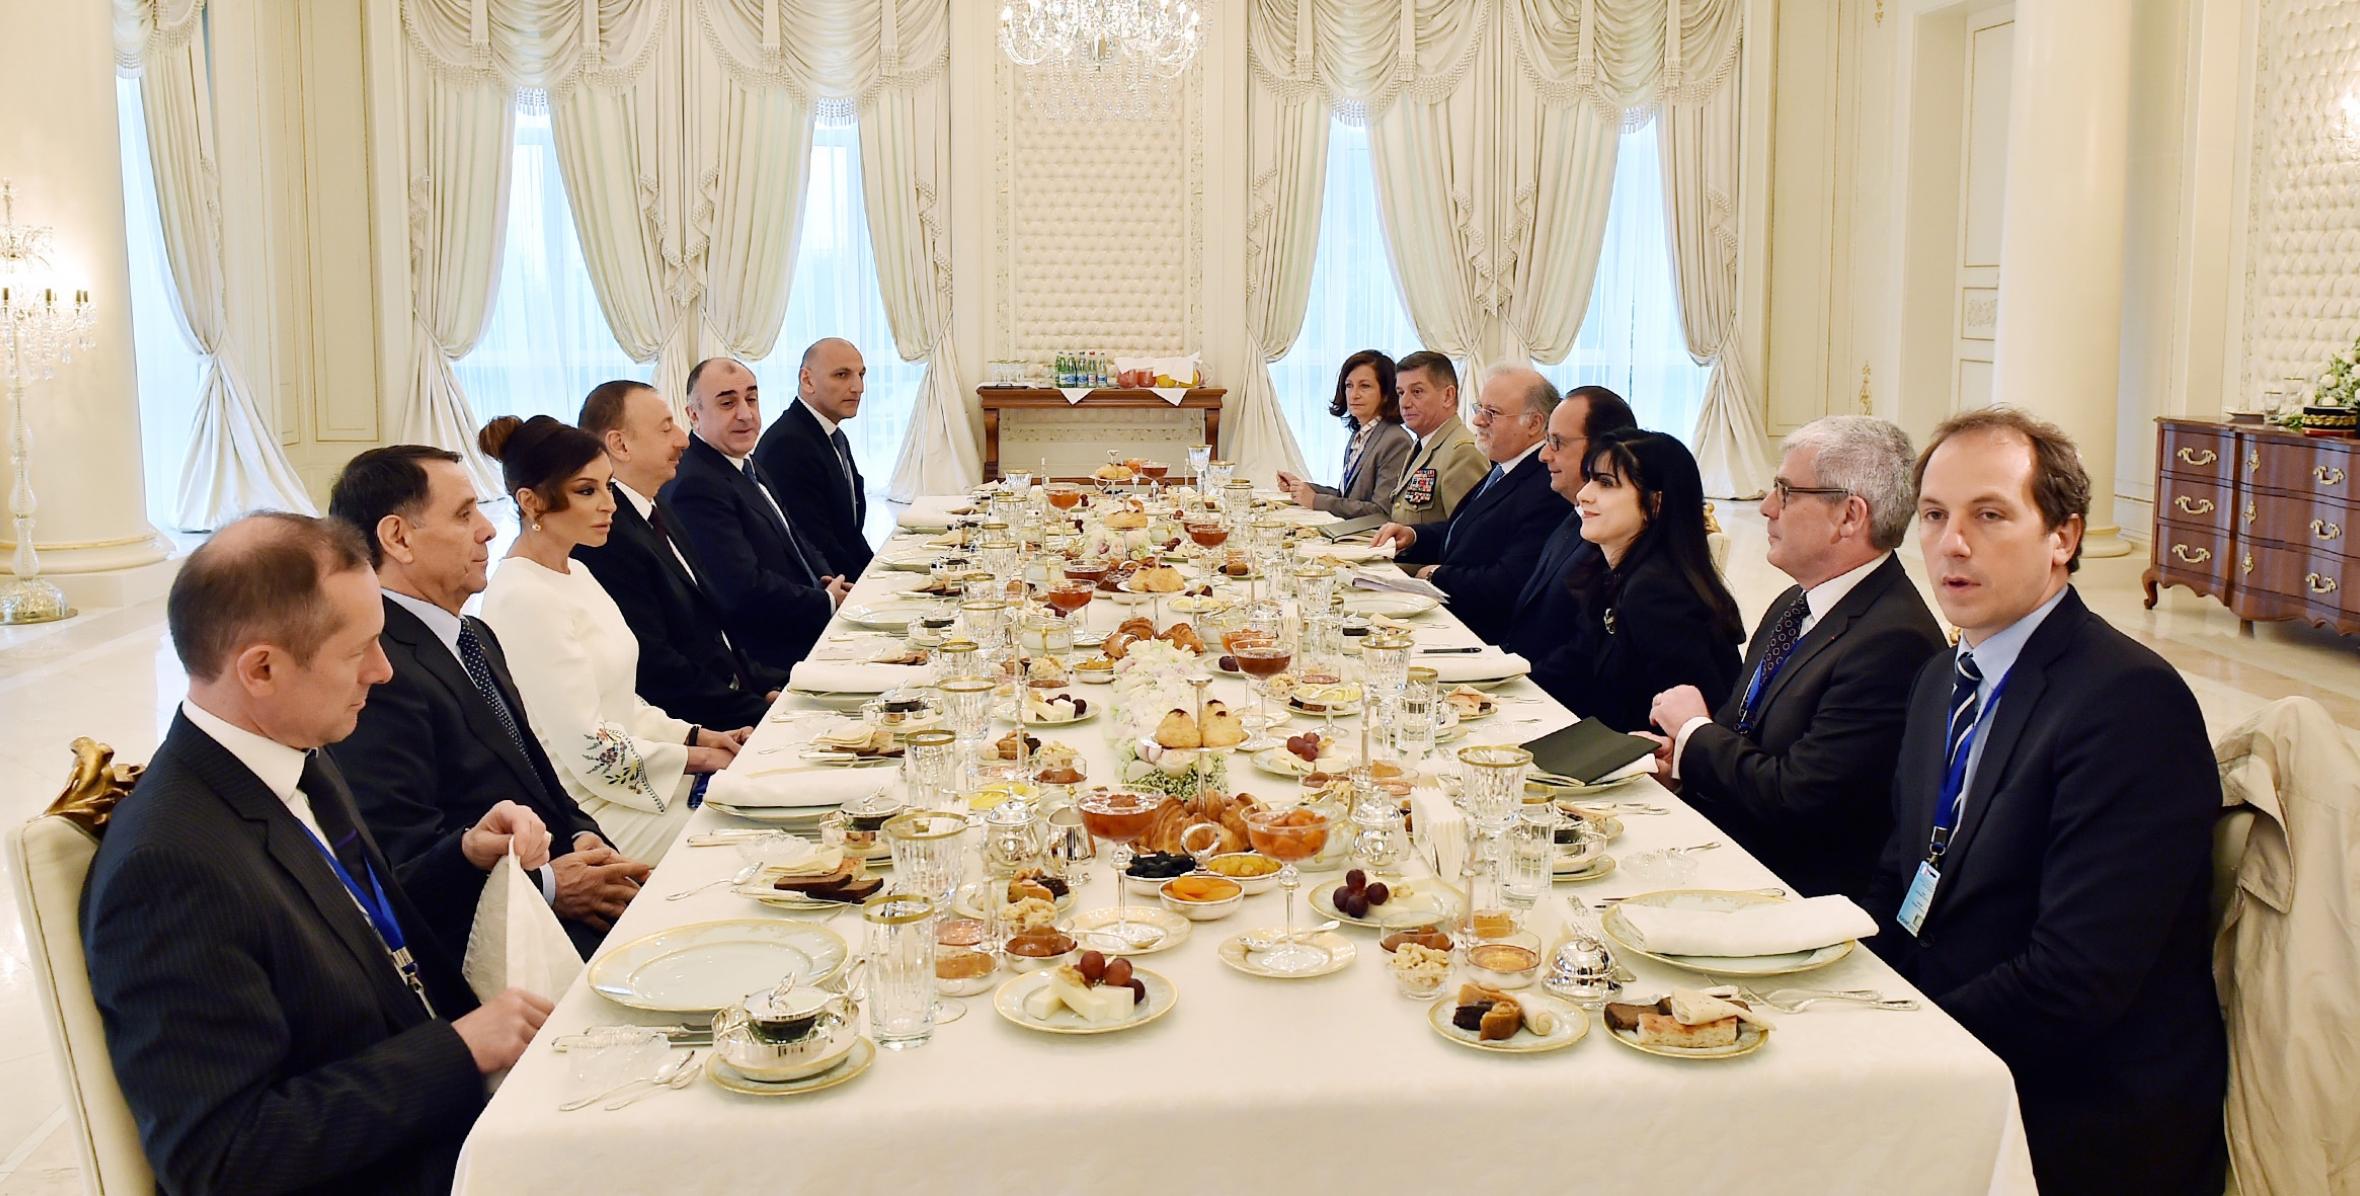 Ilham Aliyev and President of the French Republic Francois Hollande had dinner together